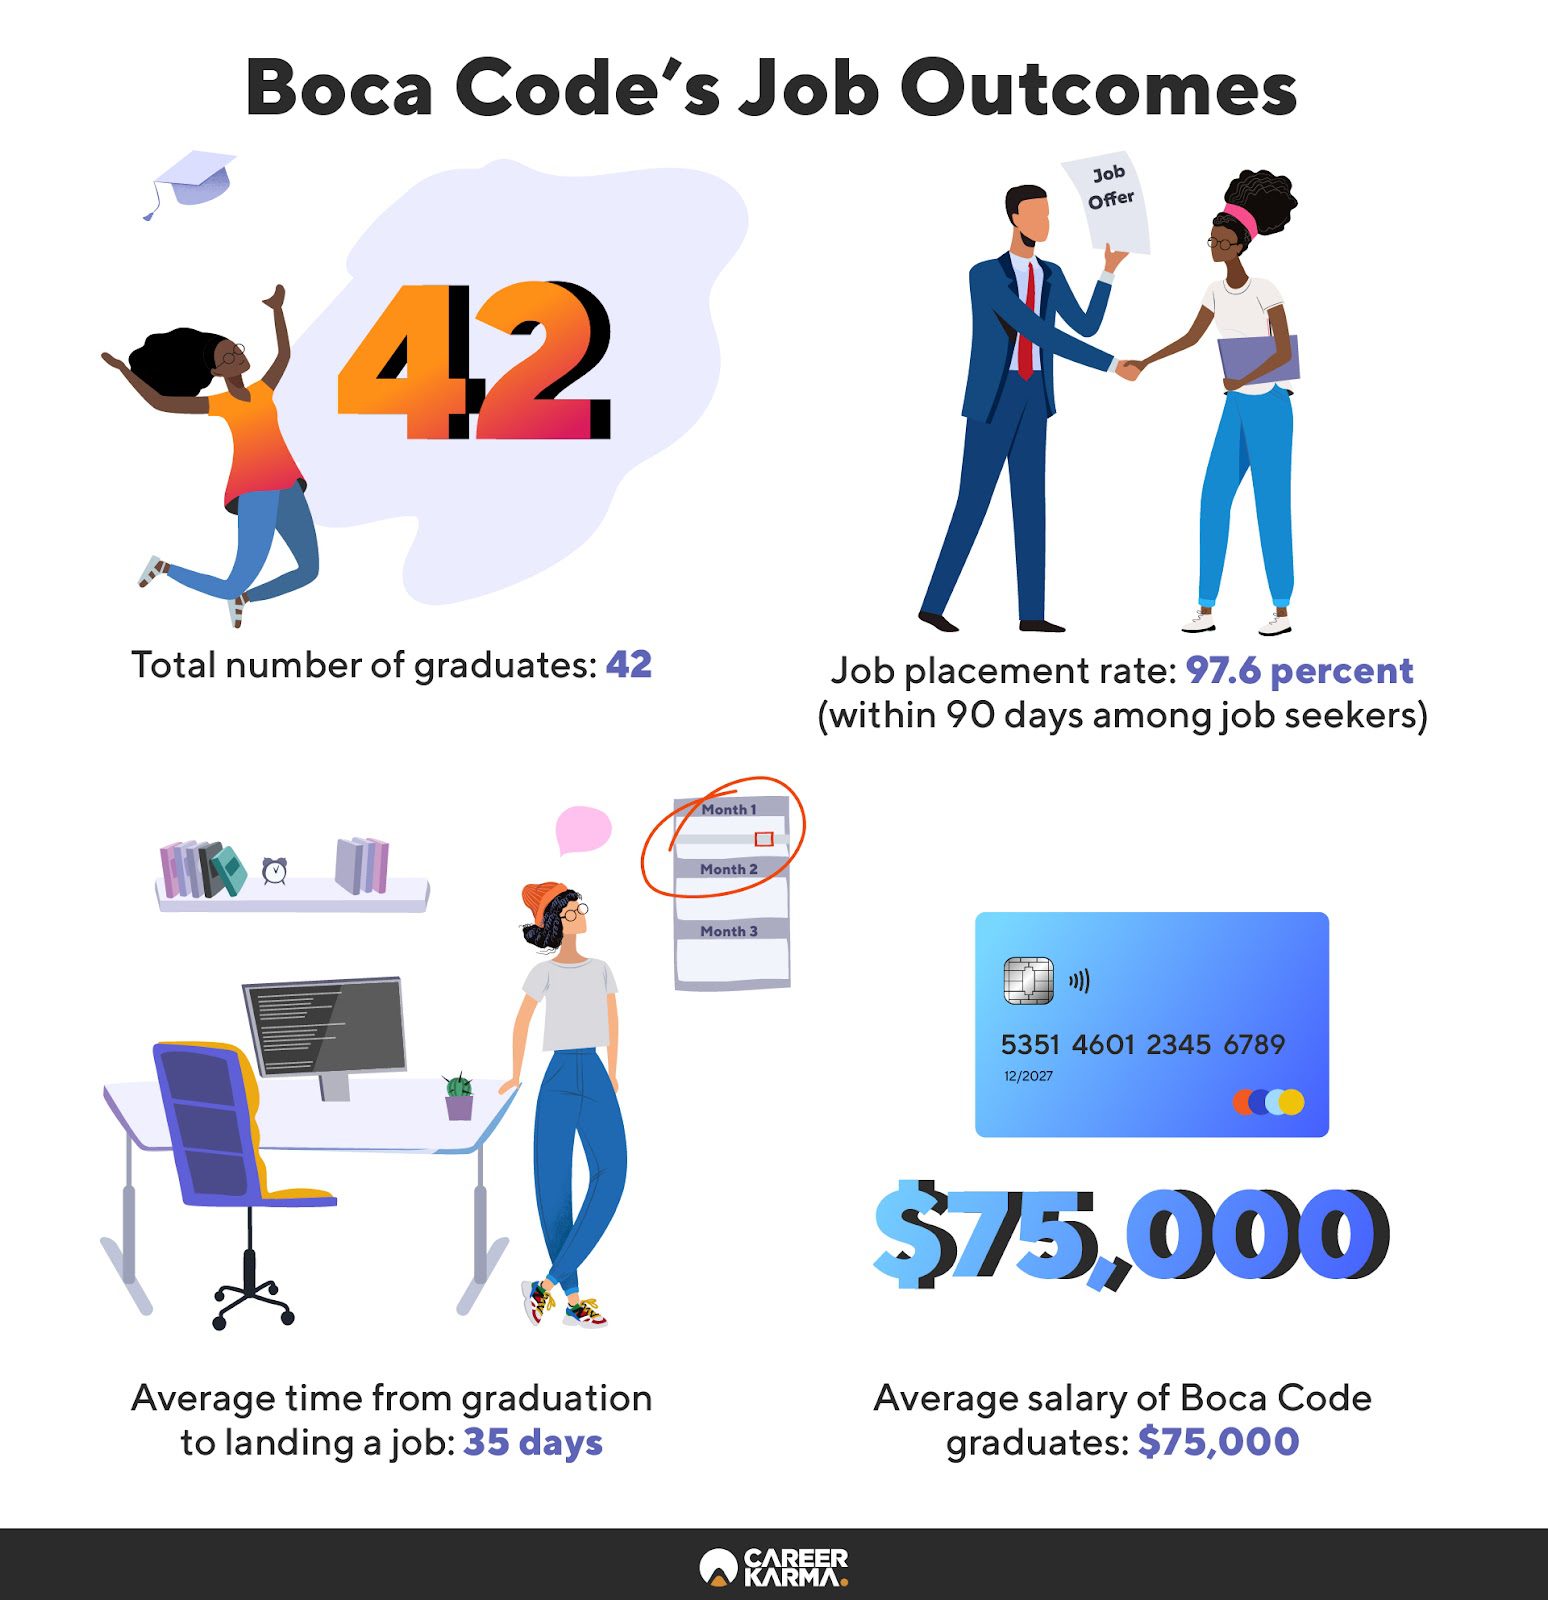 An infographic highlighting Boca Code’s student outcomes